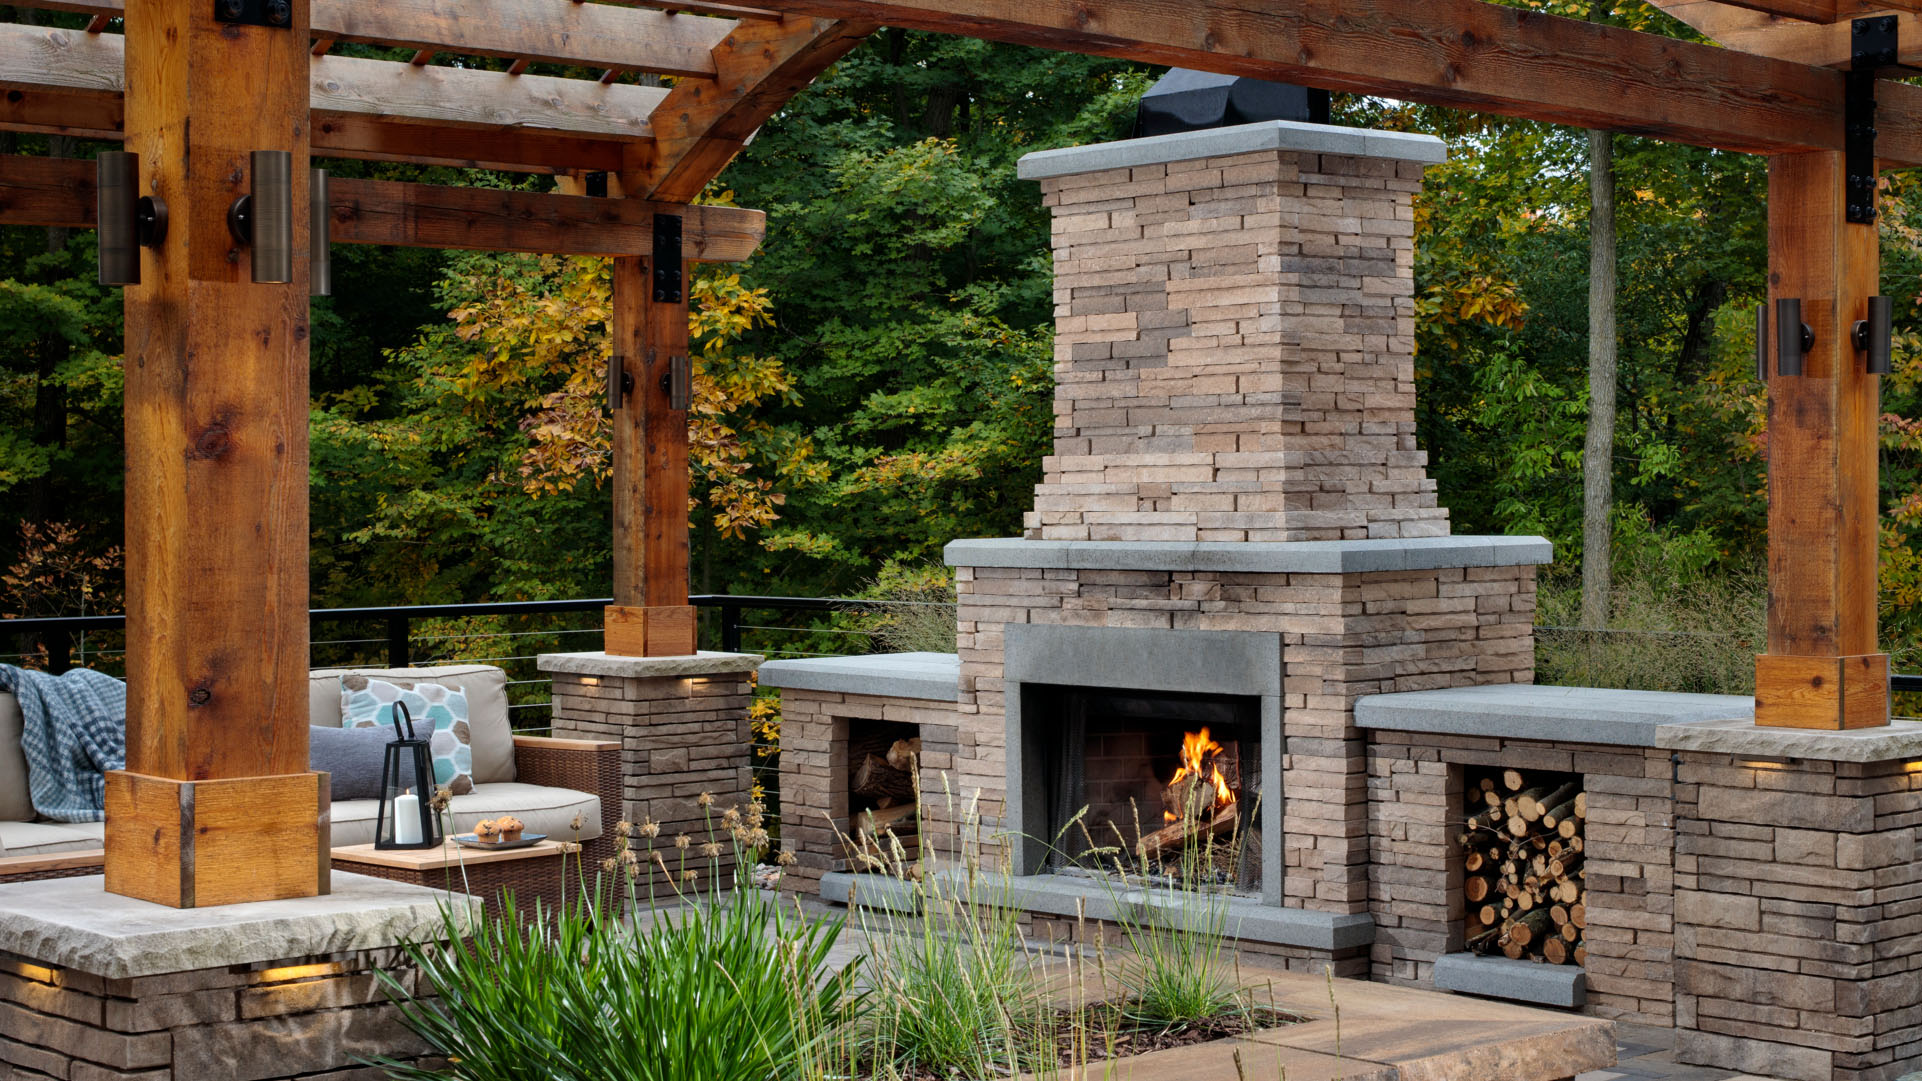 New Outdoor Patio Corner Fireplace: Stay Cozy This Winter ...